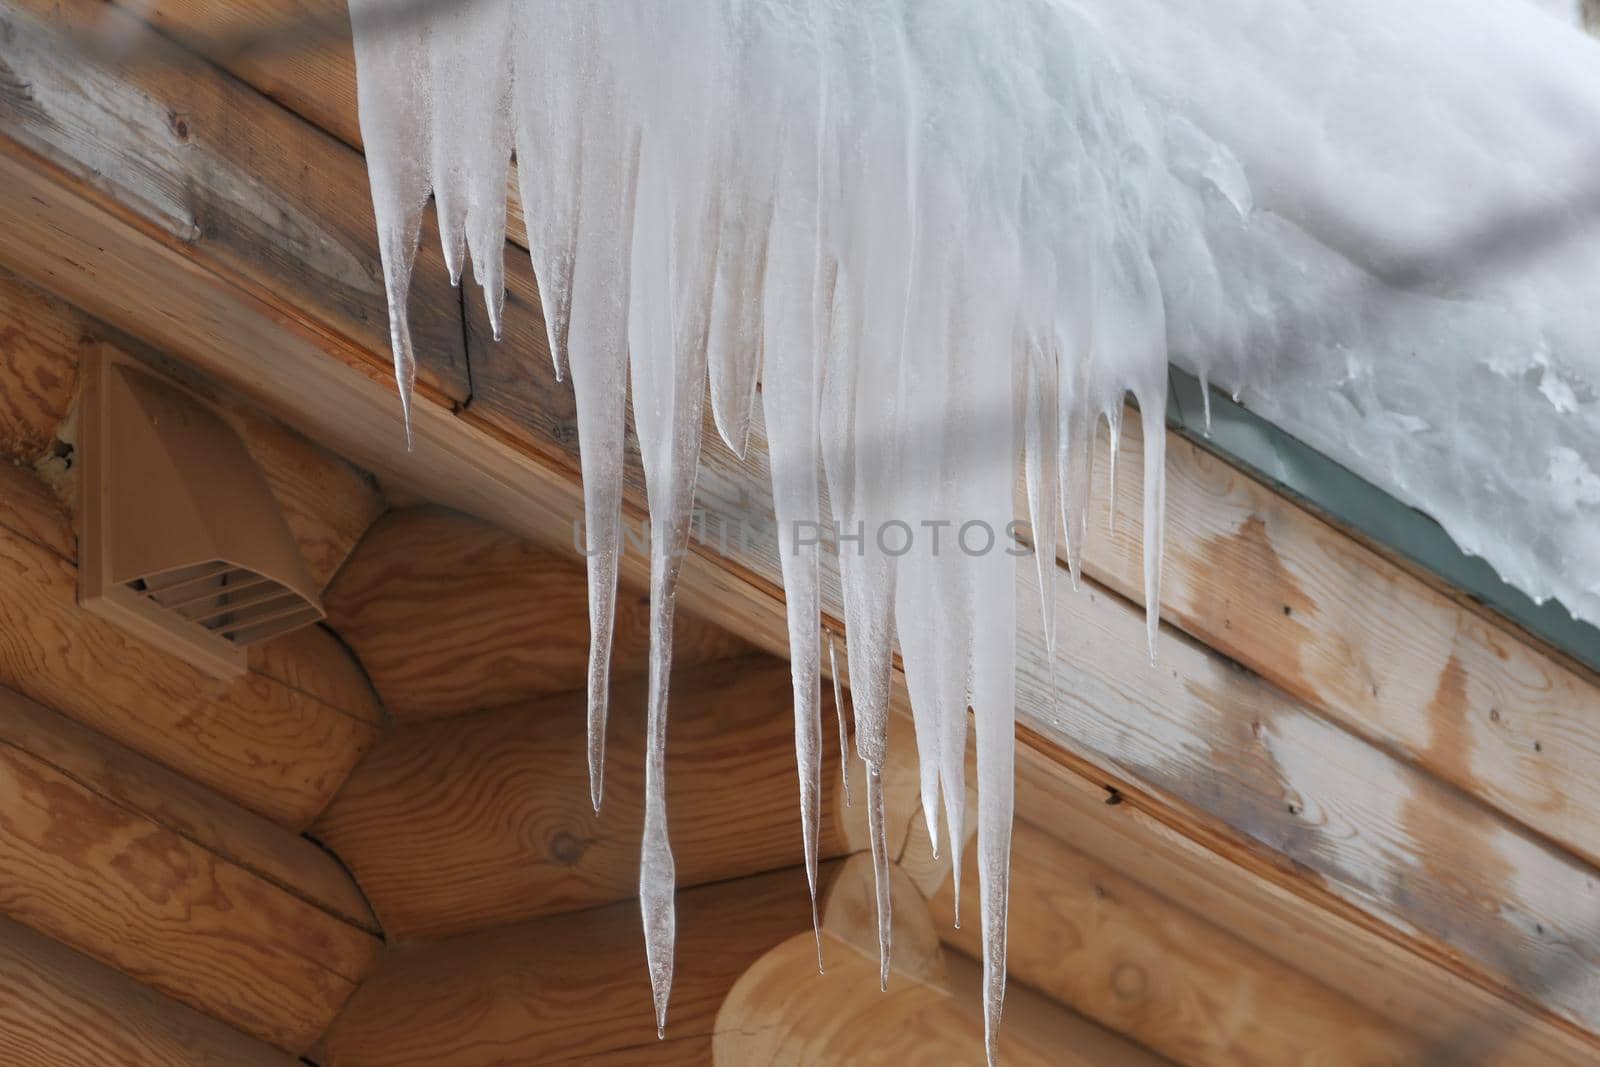 Large icicles hang from the roof of a log house. Winter frost and spring drops by Olga26